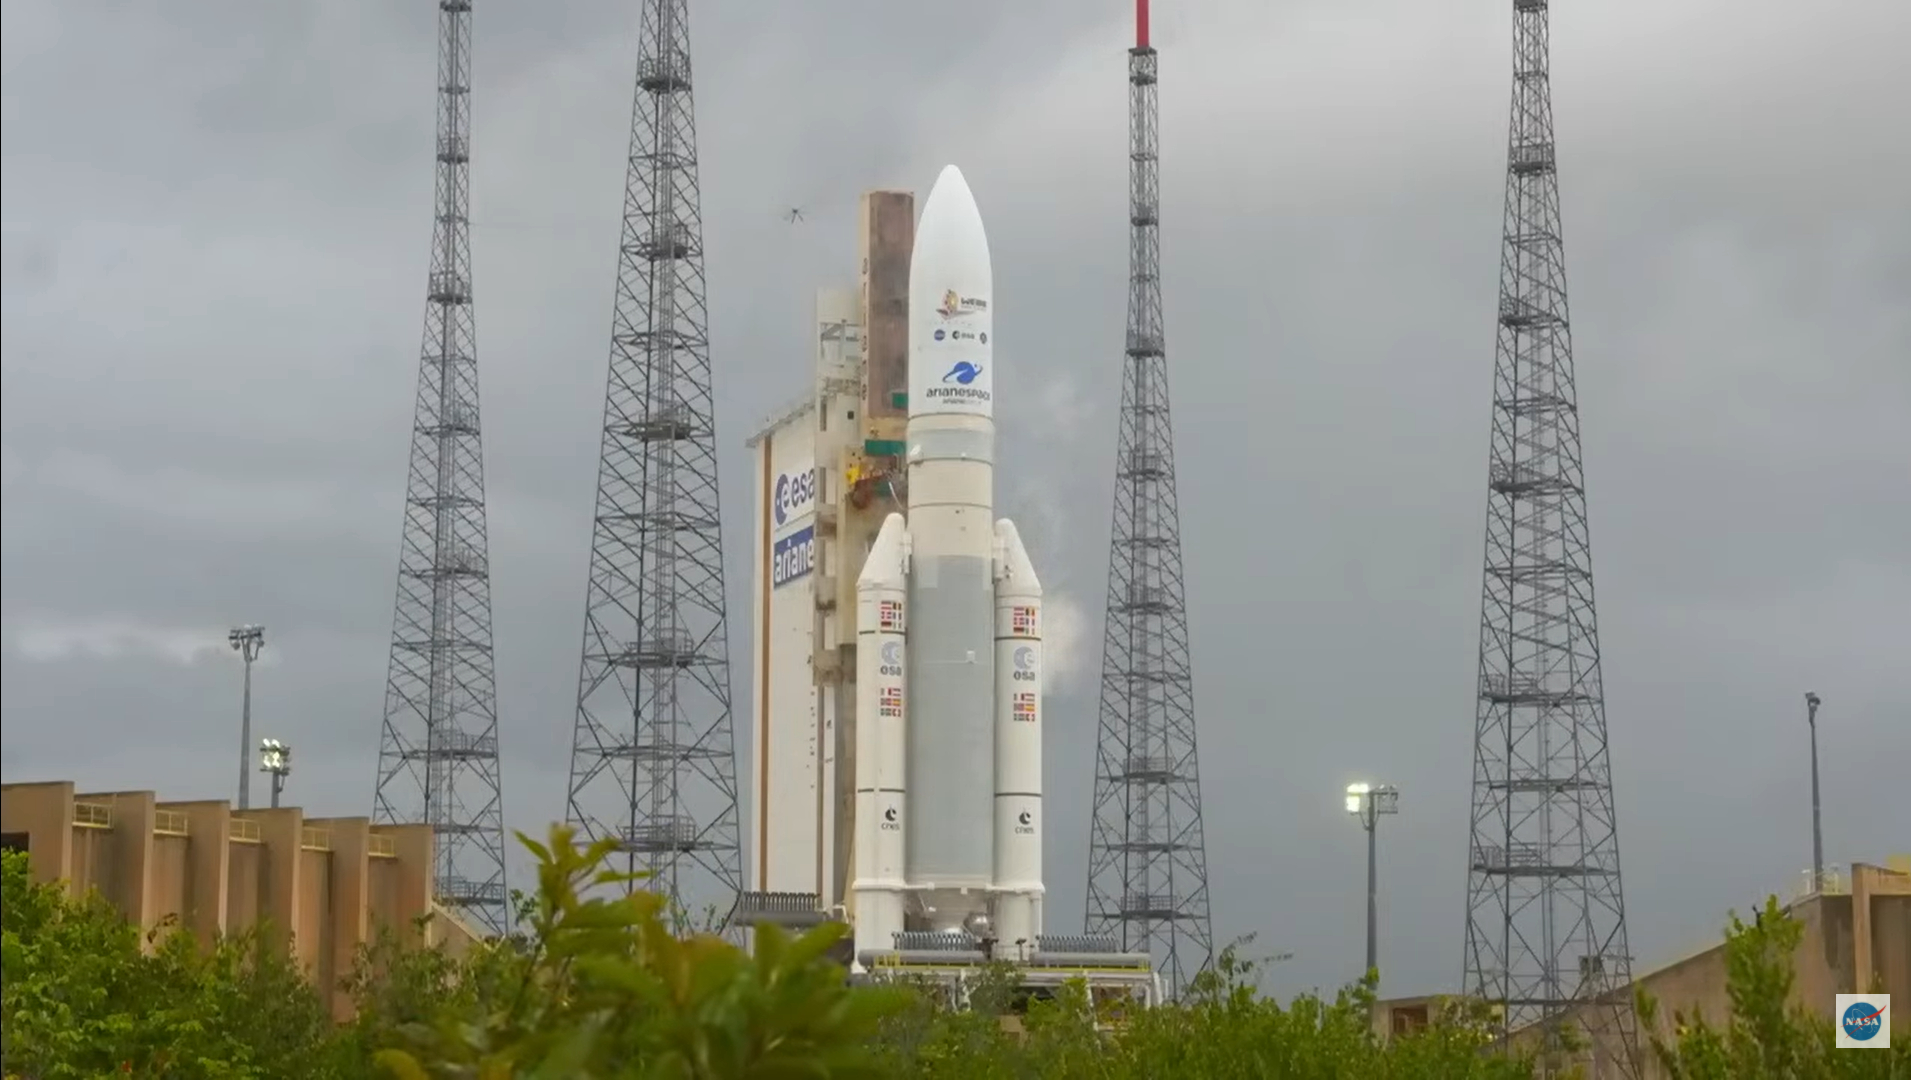 The Ariane 5 rocket carrying NASA's James Webb Space Telescope stands atop Launch Pad 3 at the Guiana Space Center in Kourou, French Guiana for launch on Dec. 25, 2021.